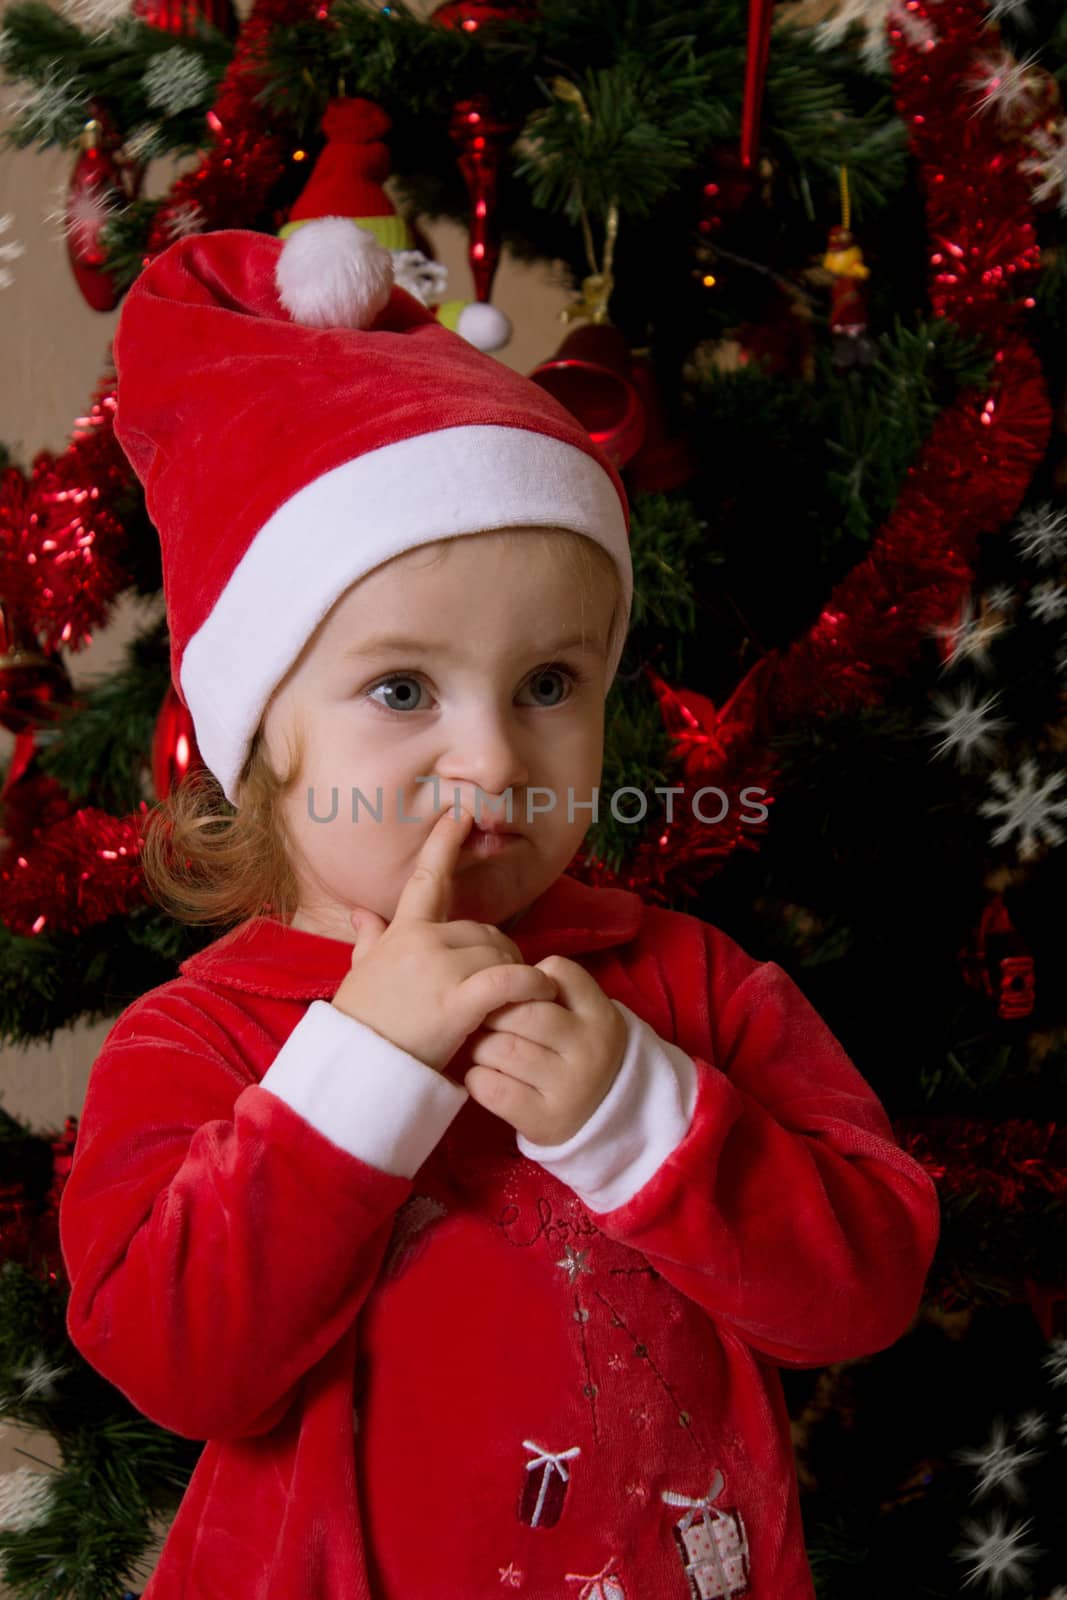 Little girl putting wishes under Christmas tree by Angel_a